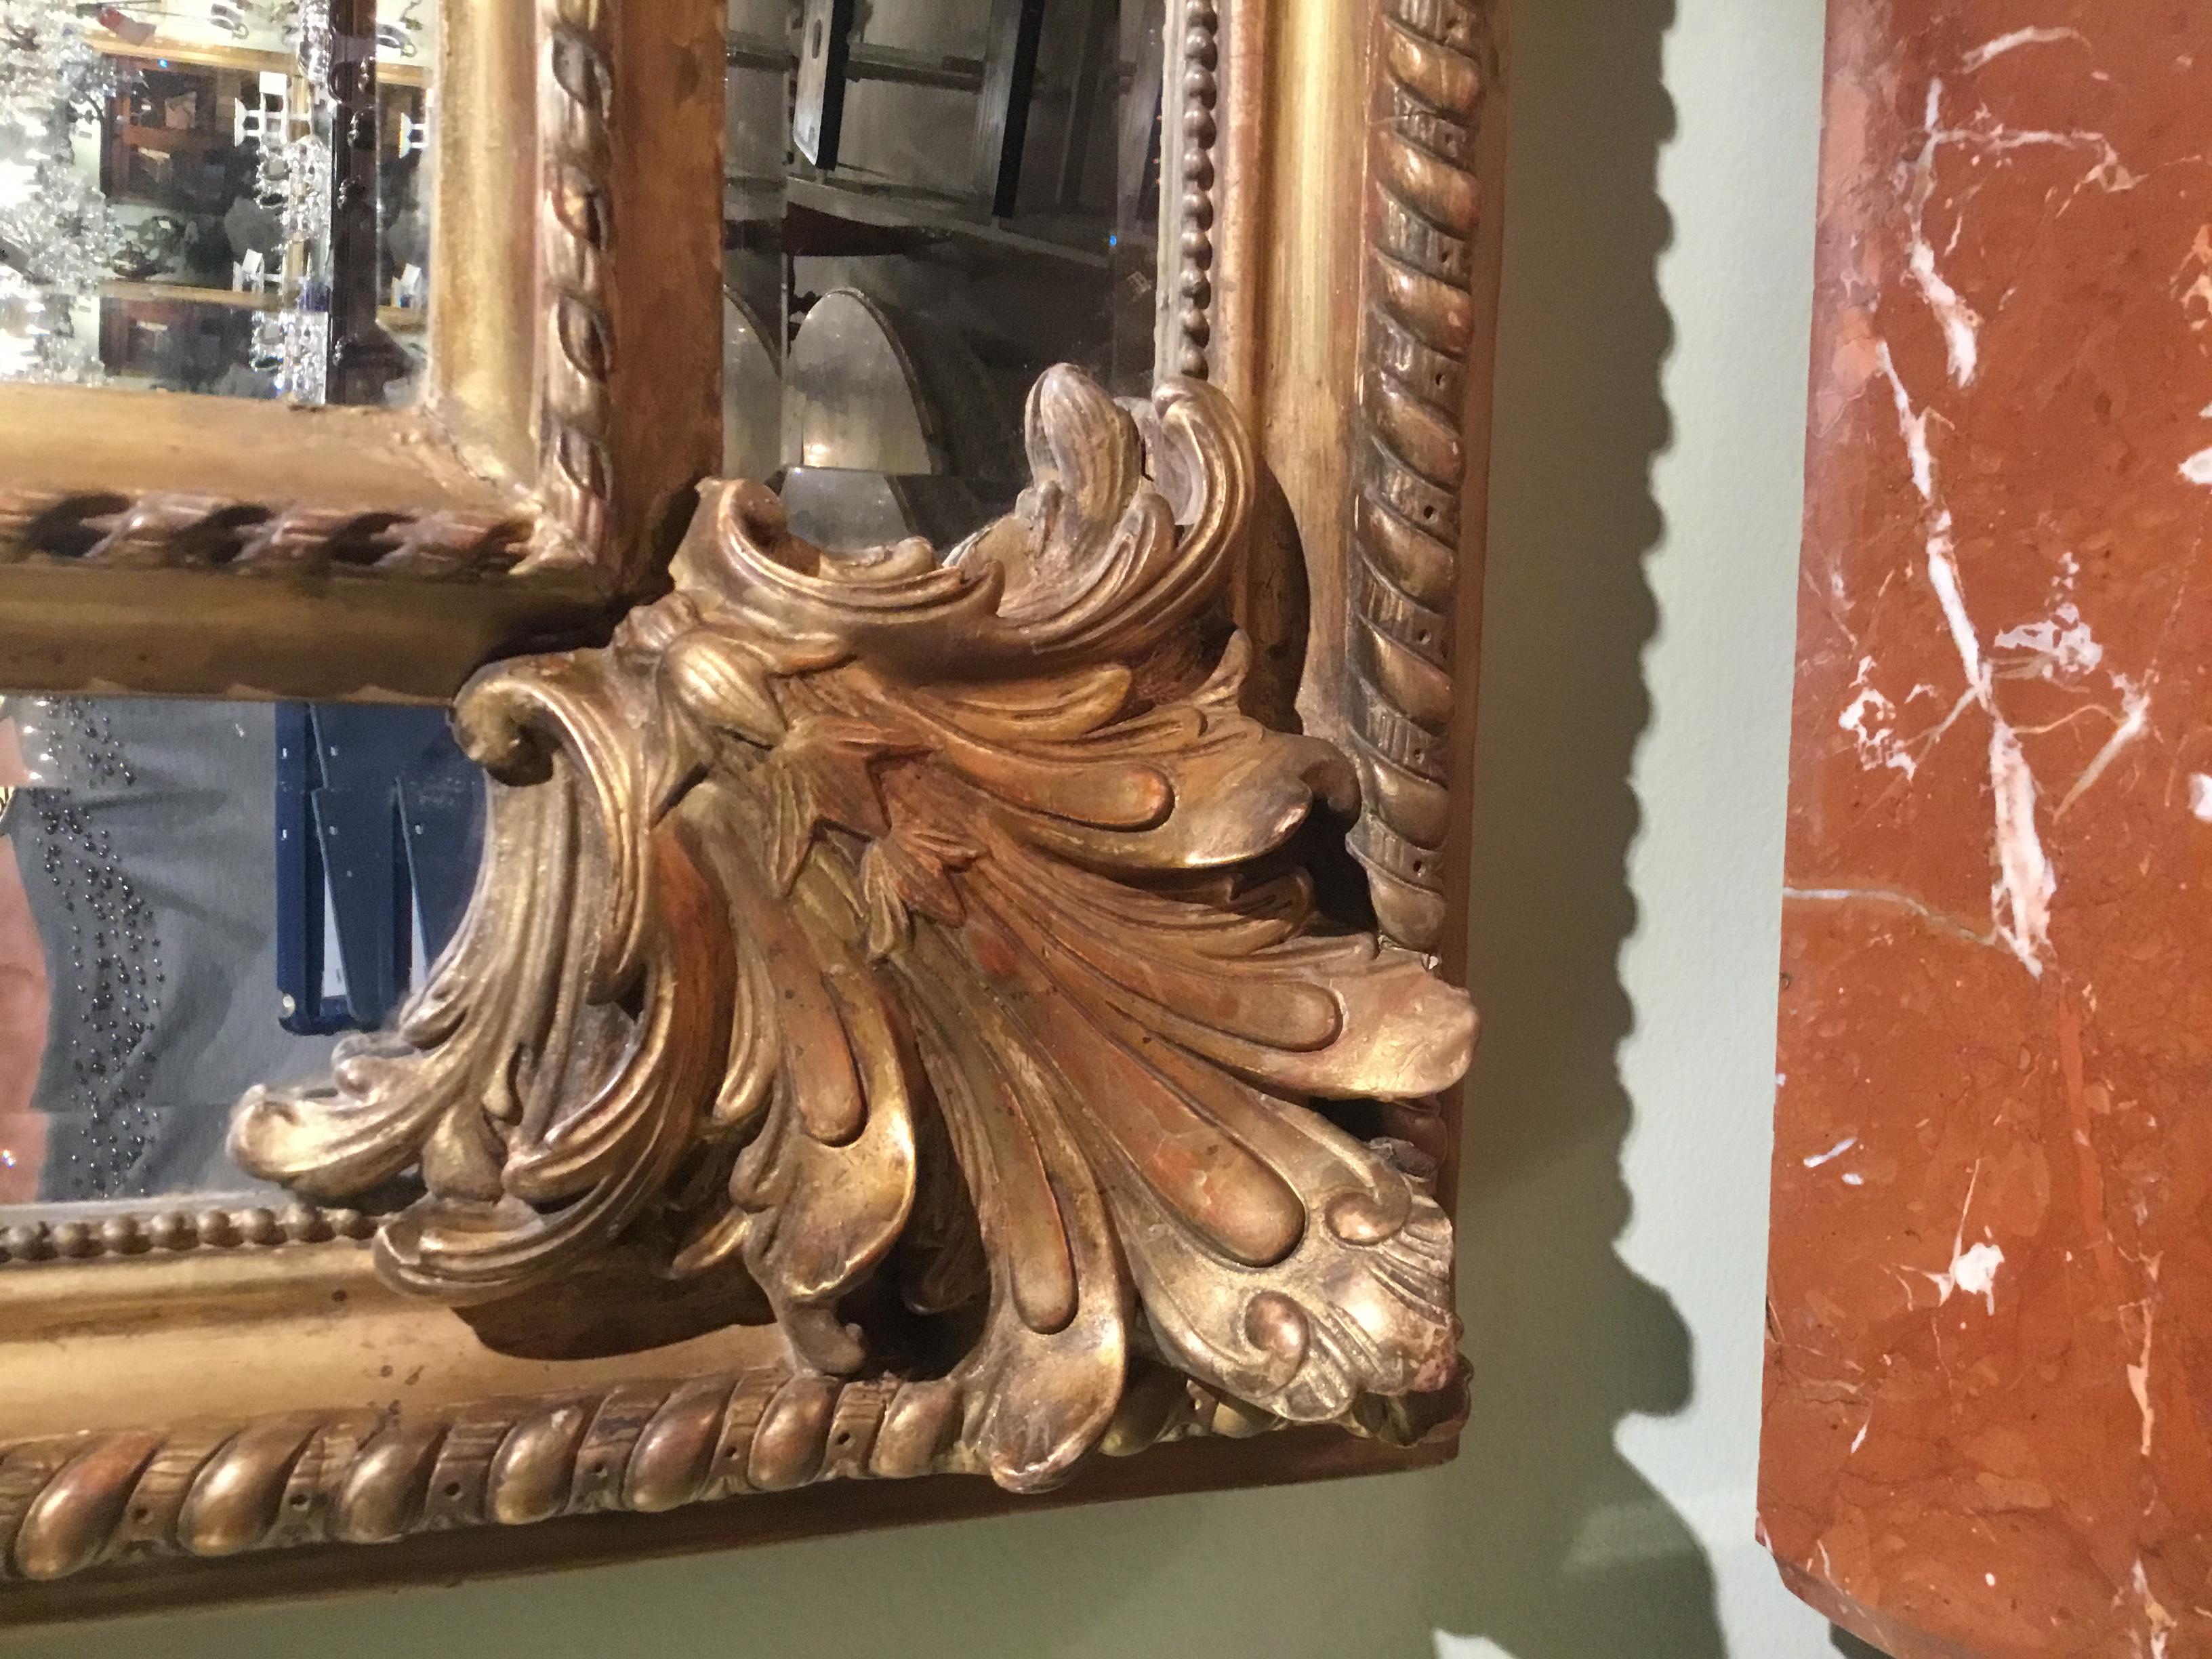 Exceptional and special mirror with elaborate design in the Rococo style.
Giltwood hand carved with large swirling pattern at the crest, a rope design
surrounds the entire edge, it is double framed in the cushion manner. Each
corner has an